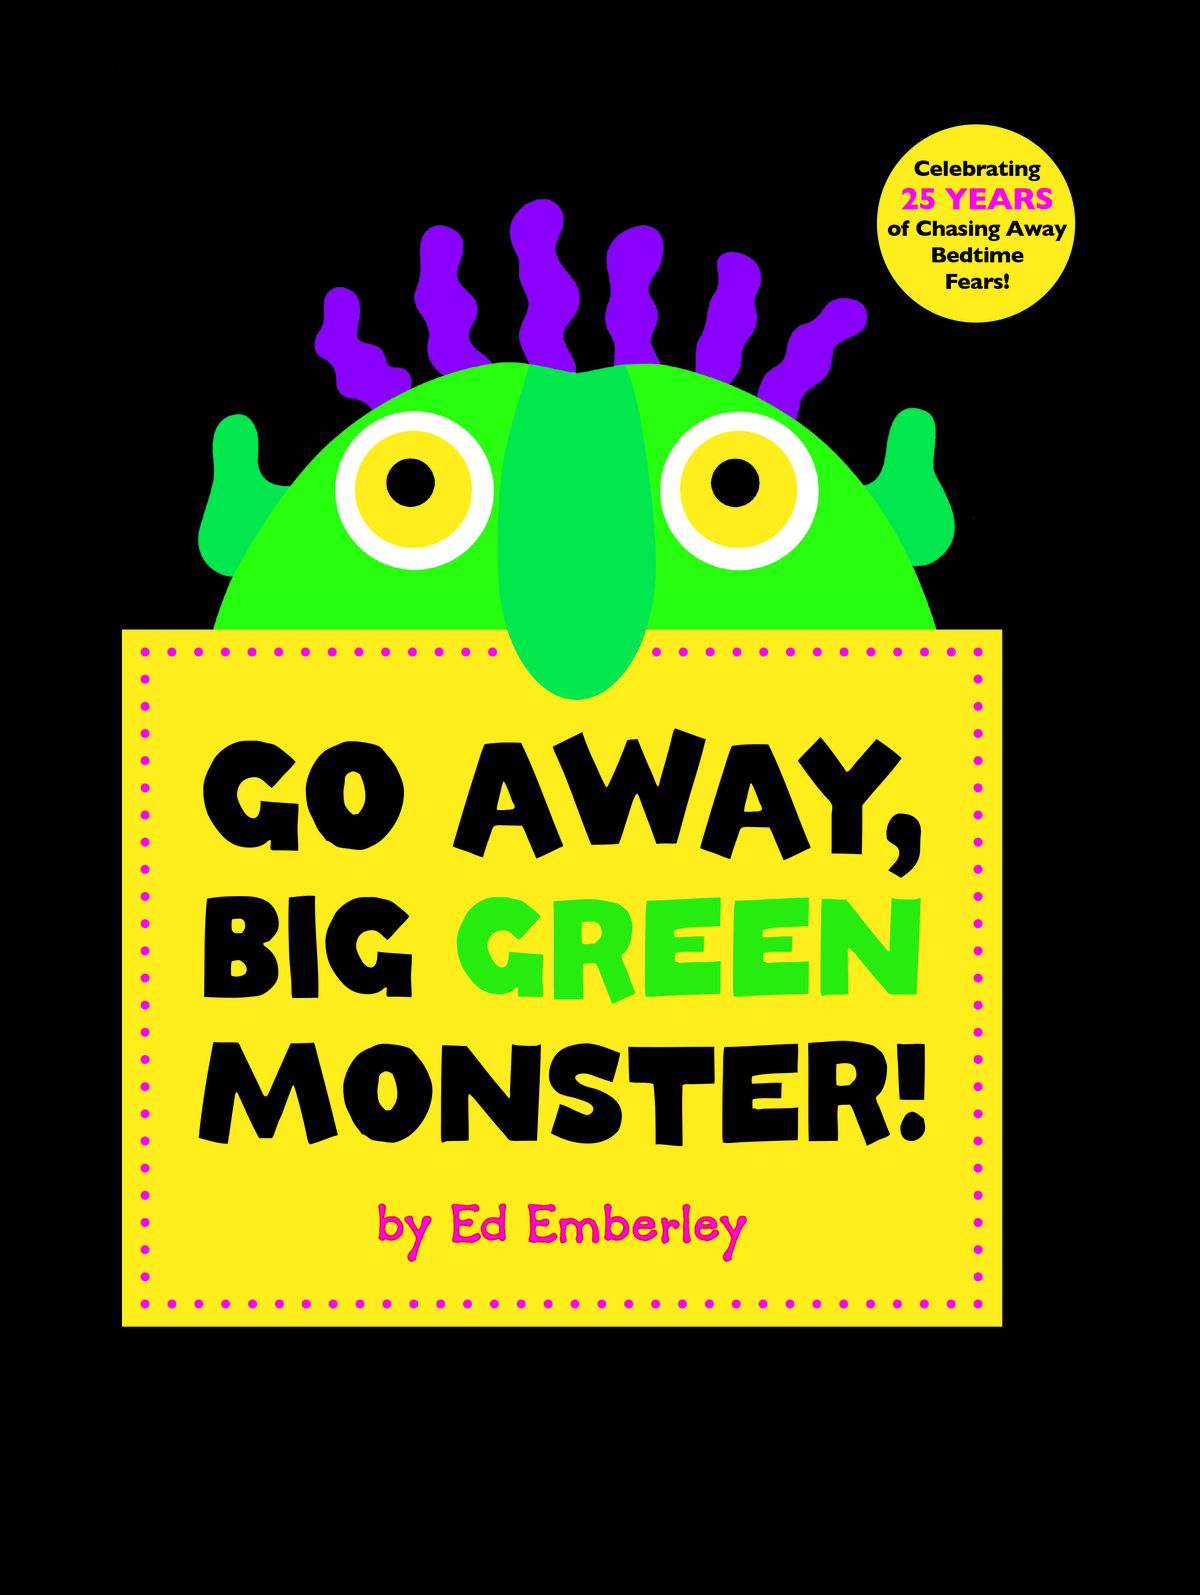 Ed Emberley’s timeless interactive picture book “Go Away, Big Green Monster” gives kids the chance to face their fears head on as they turn each die-cut page to see the colorful monster evolve and disappear before their eyes.